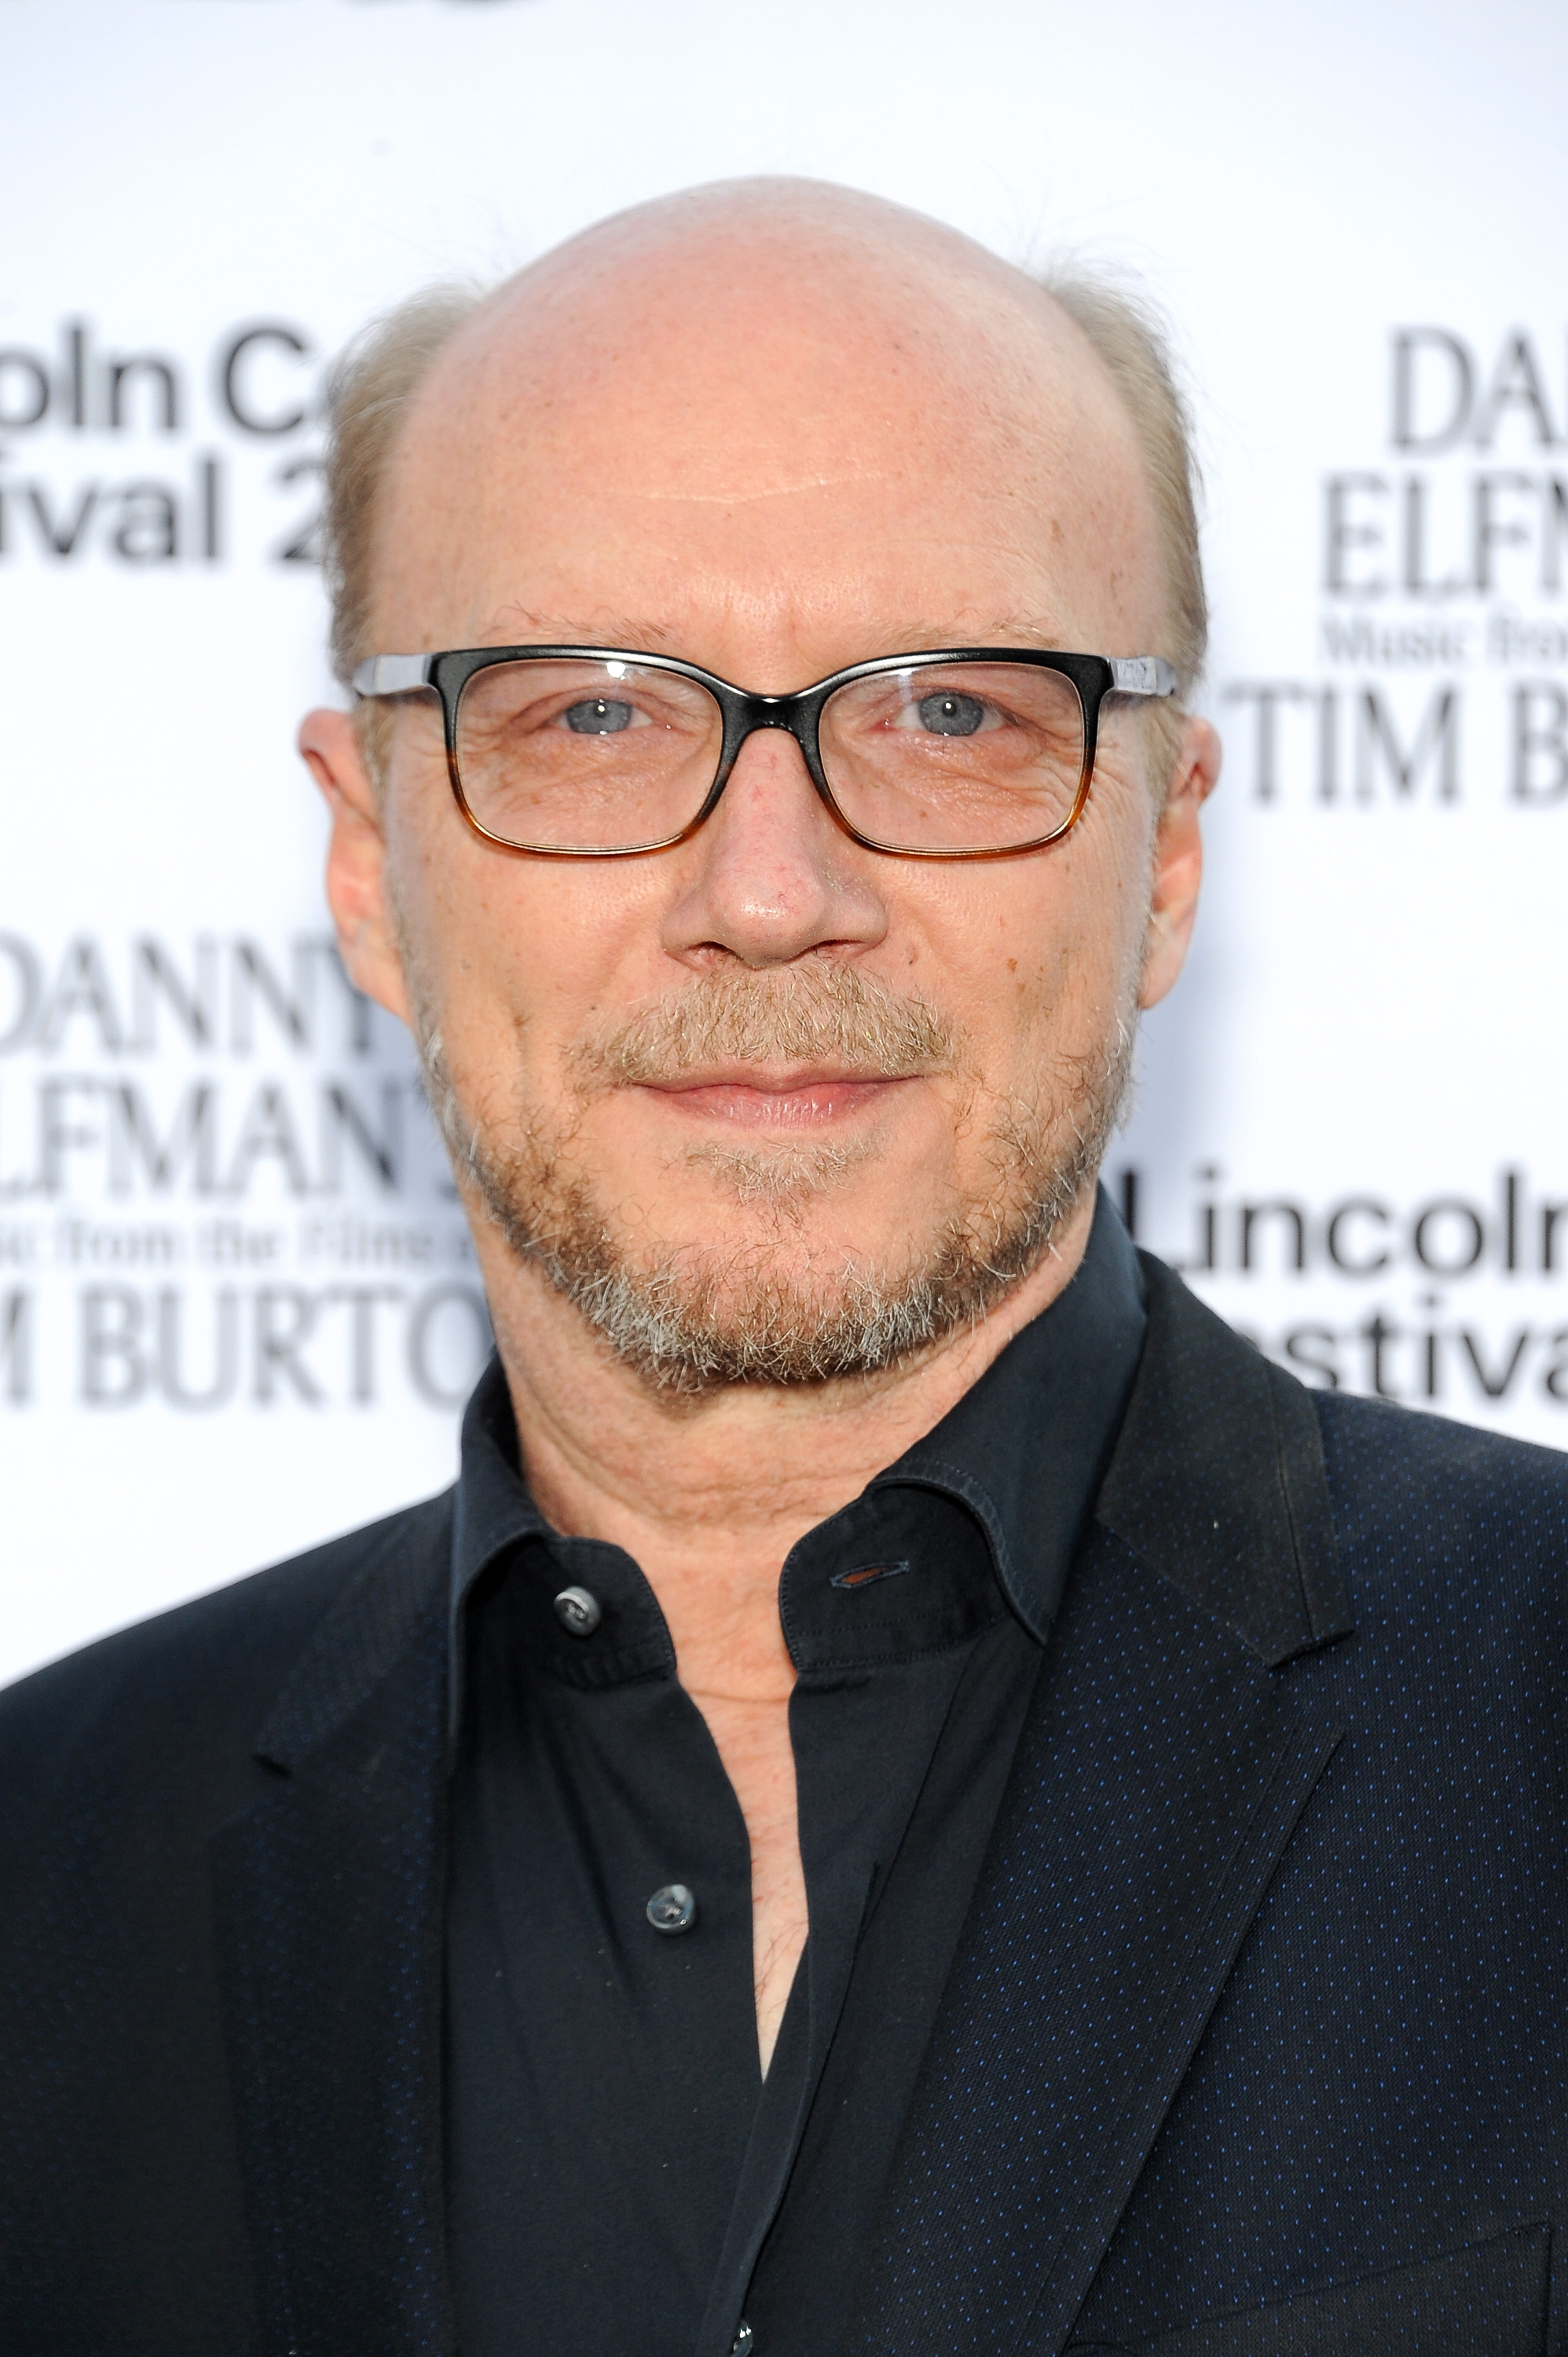 Paul Haggis attends the opening night of "Danny Elfman's Music from the Films of Tim Burton" at Lincoln Center on July 6, 2015 in New York City. (D Dipasupil--FilmMagic)